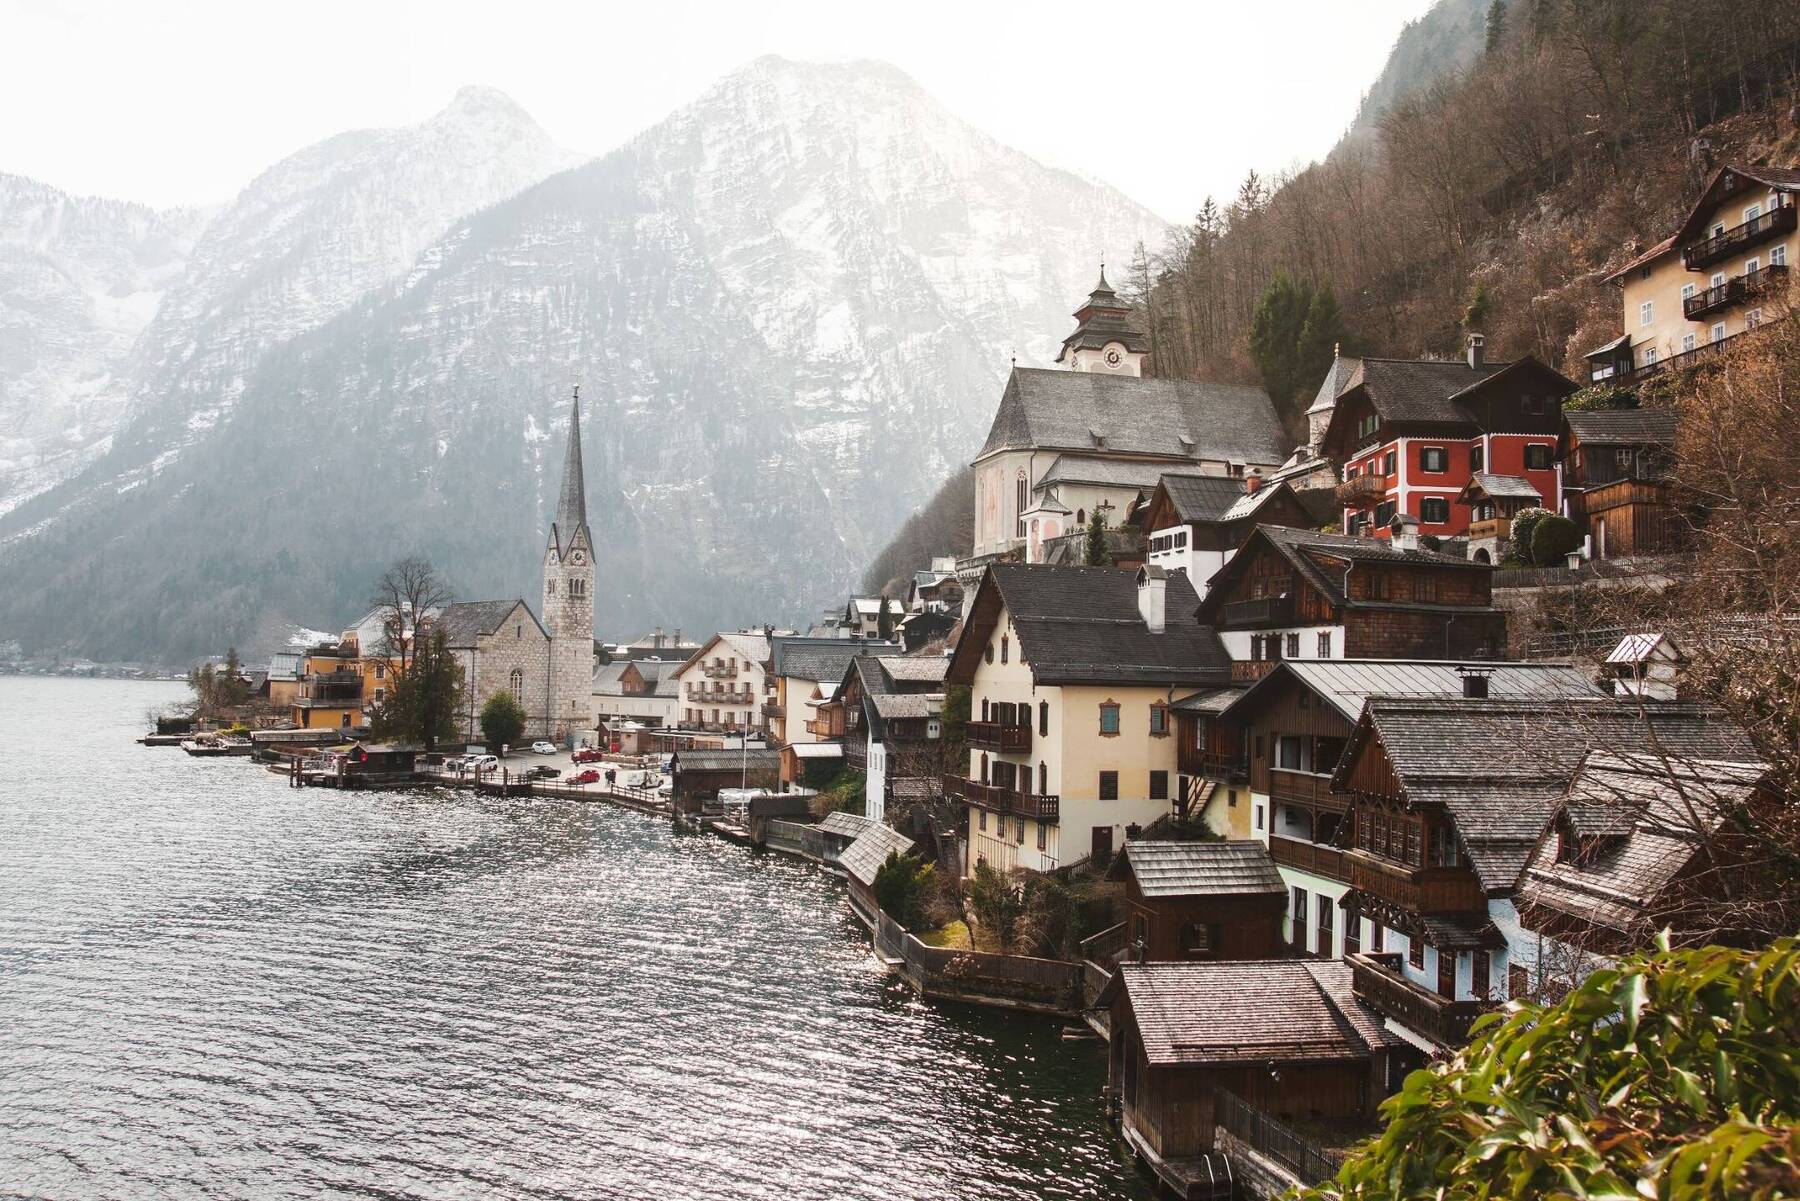 Austria’s Picture-Perfect Towns for Photographers